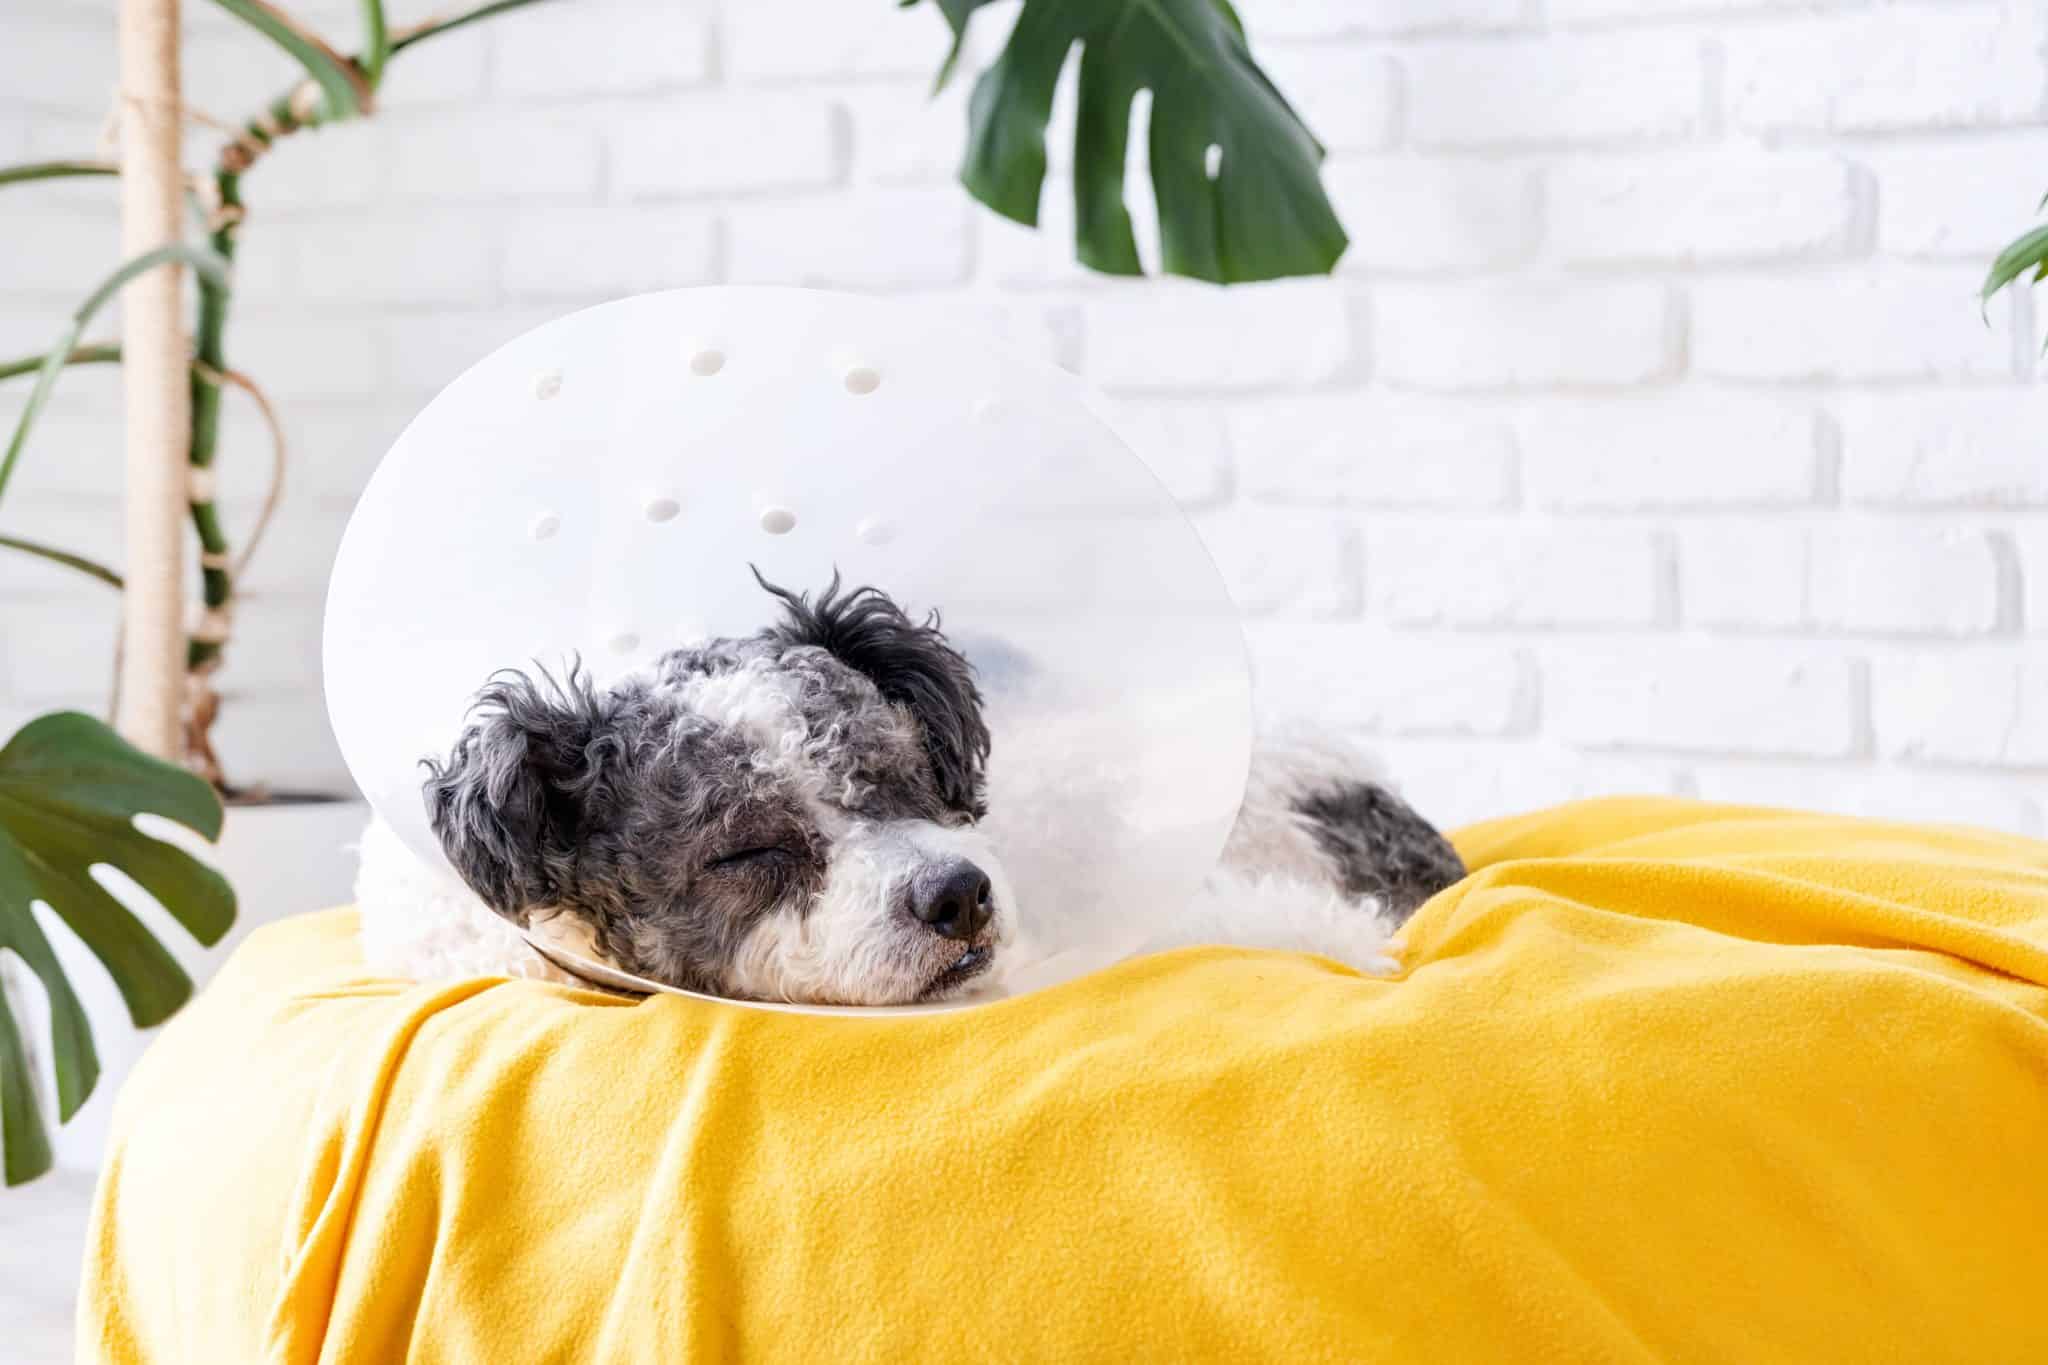 Cute Mixed Breed Dog Wearing Protective Cone Collar After Surgery, Medical Tools And Equipment.